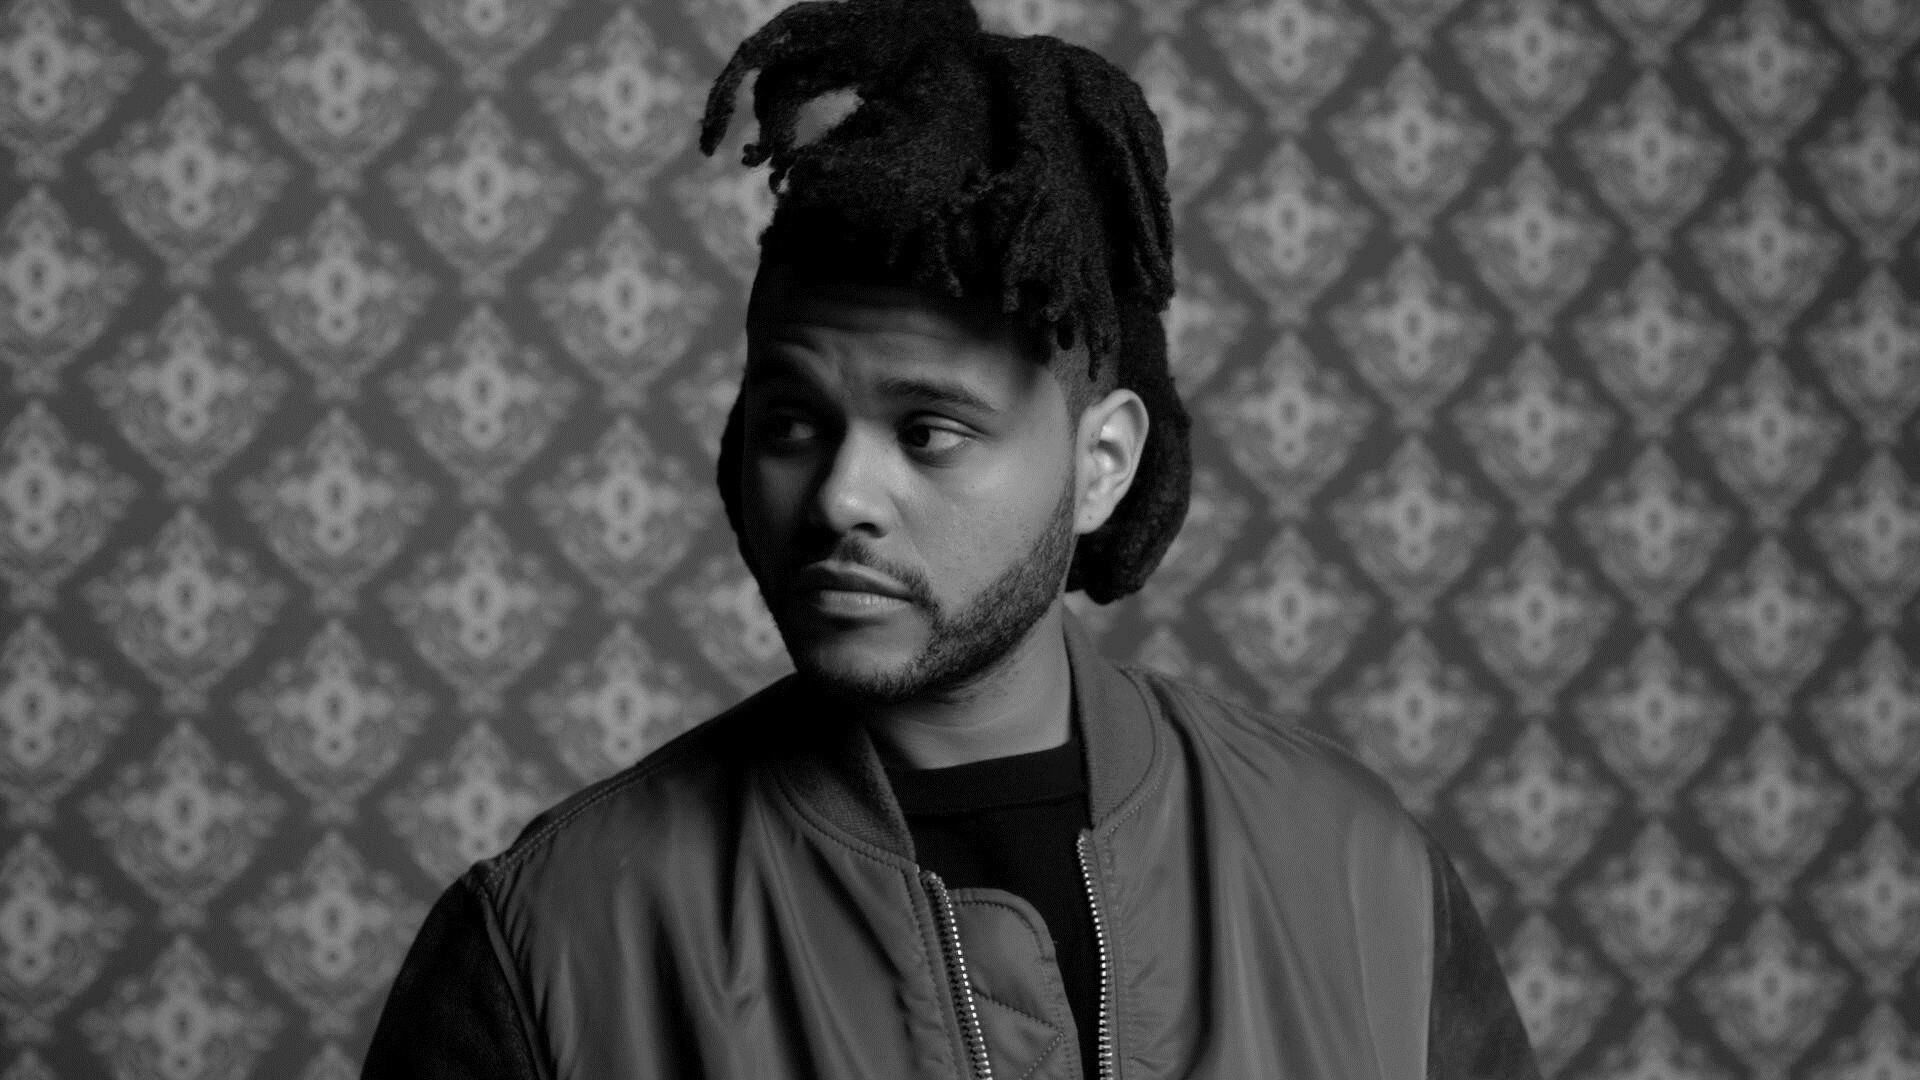 The Weeknd: Known for his compelling brand of atmospheric, trip-hop-infused R'n'B and synth-driven pop music. 1920x1080 Full HD Background.